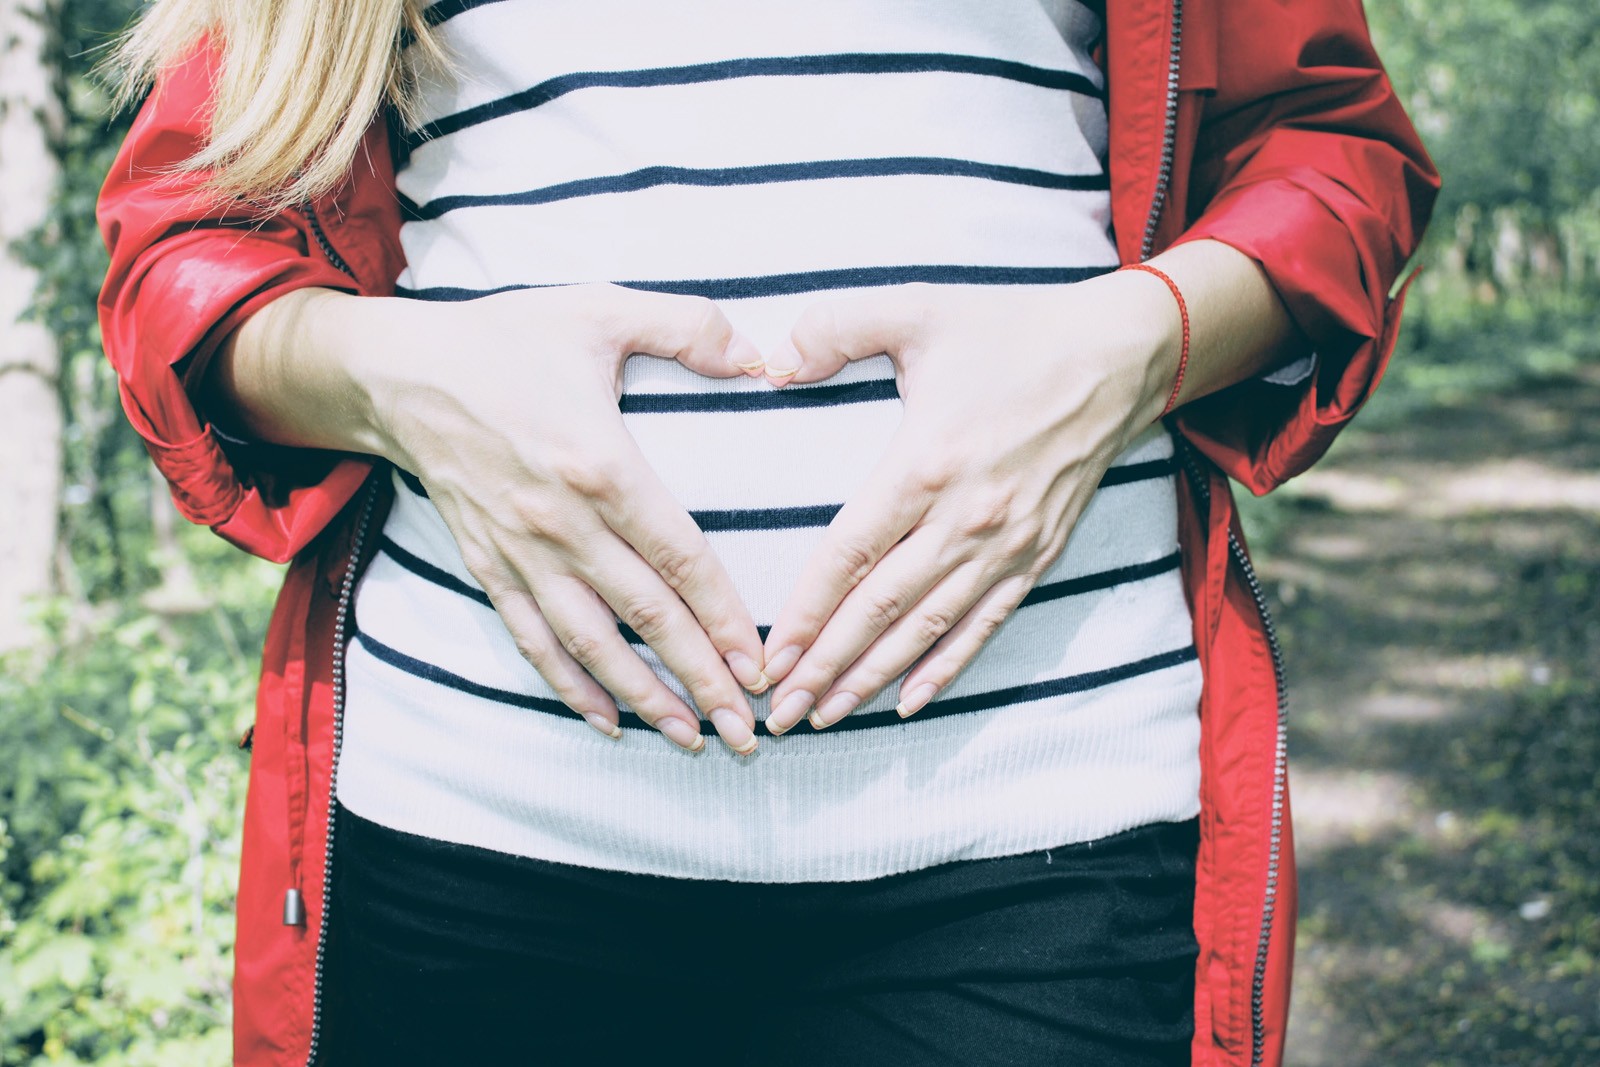 Here’s My Story About Interviewing While Pregnant